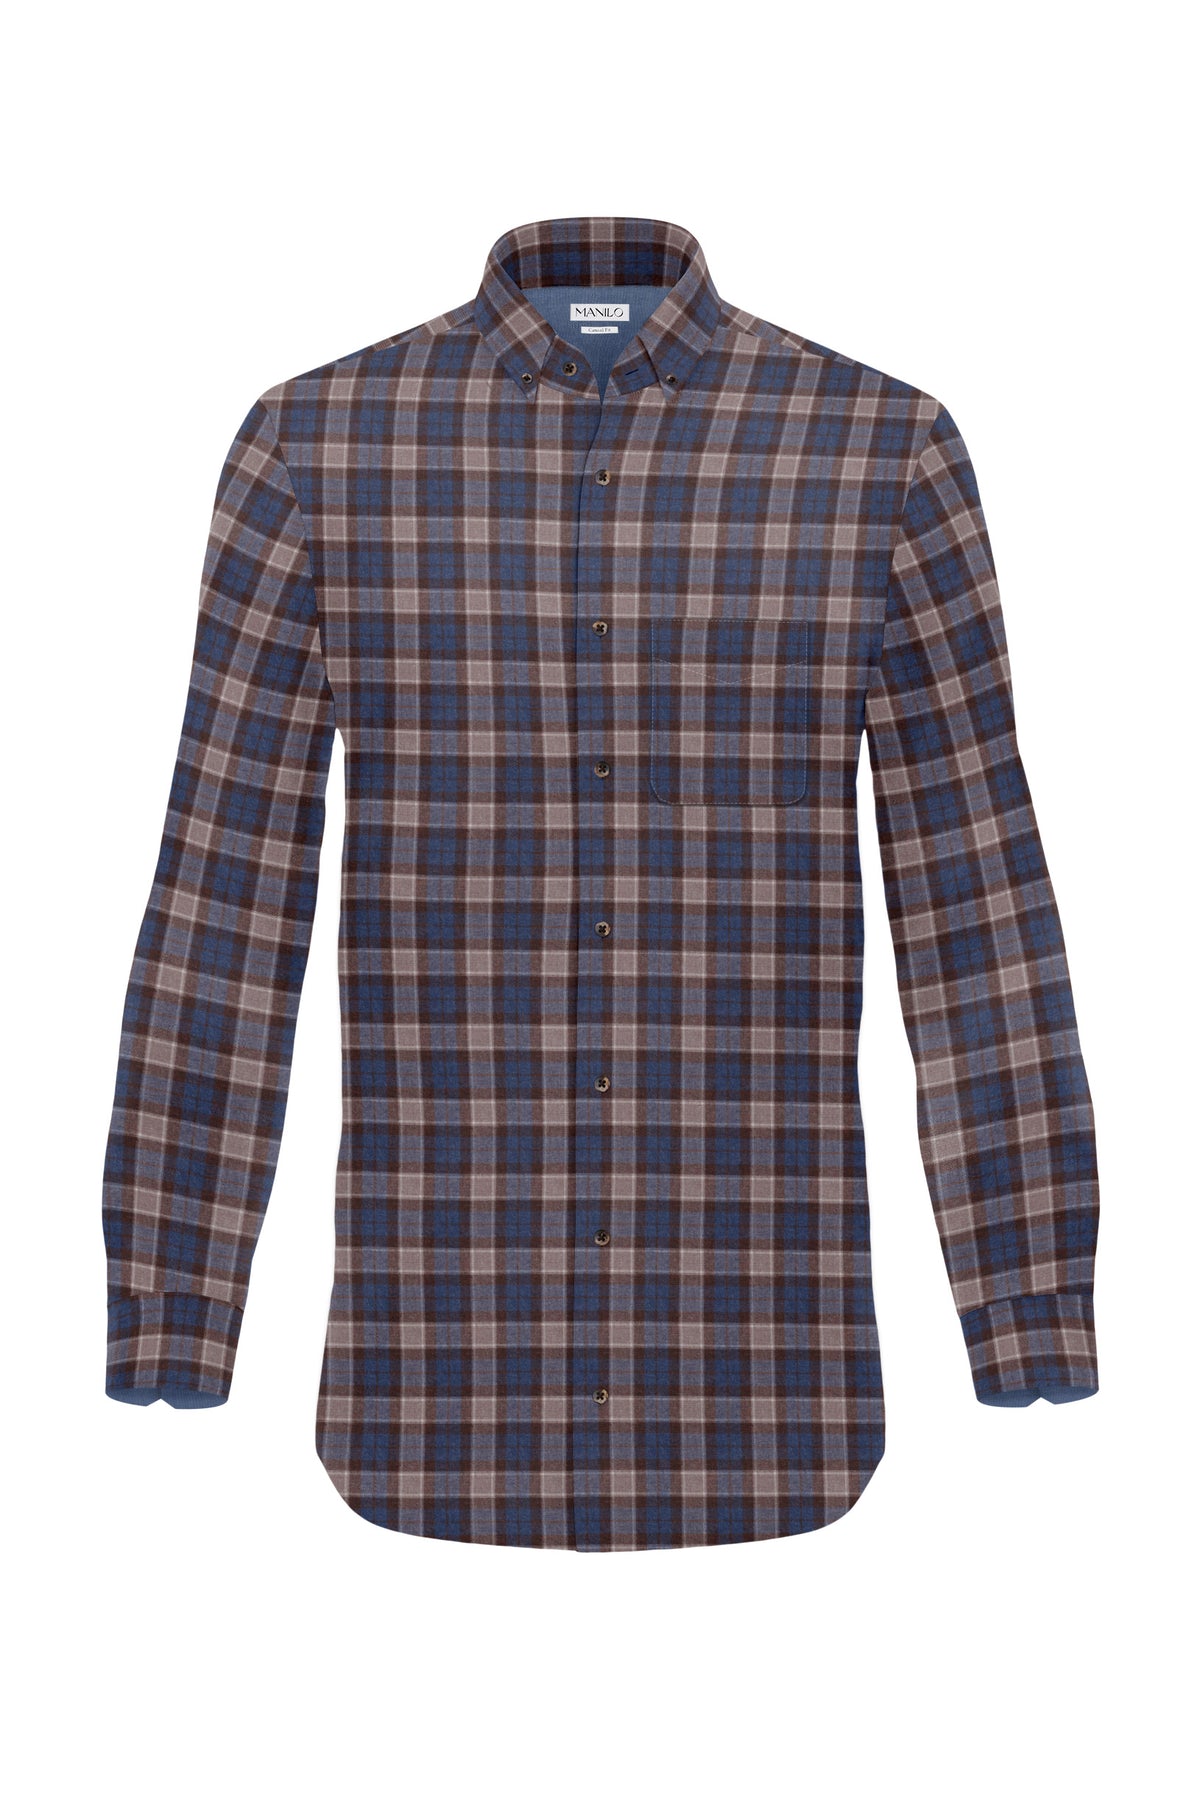 Flannel shirt with check pattern in blue/beige (Art. 2134-C)